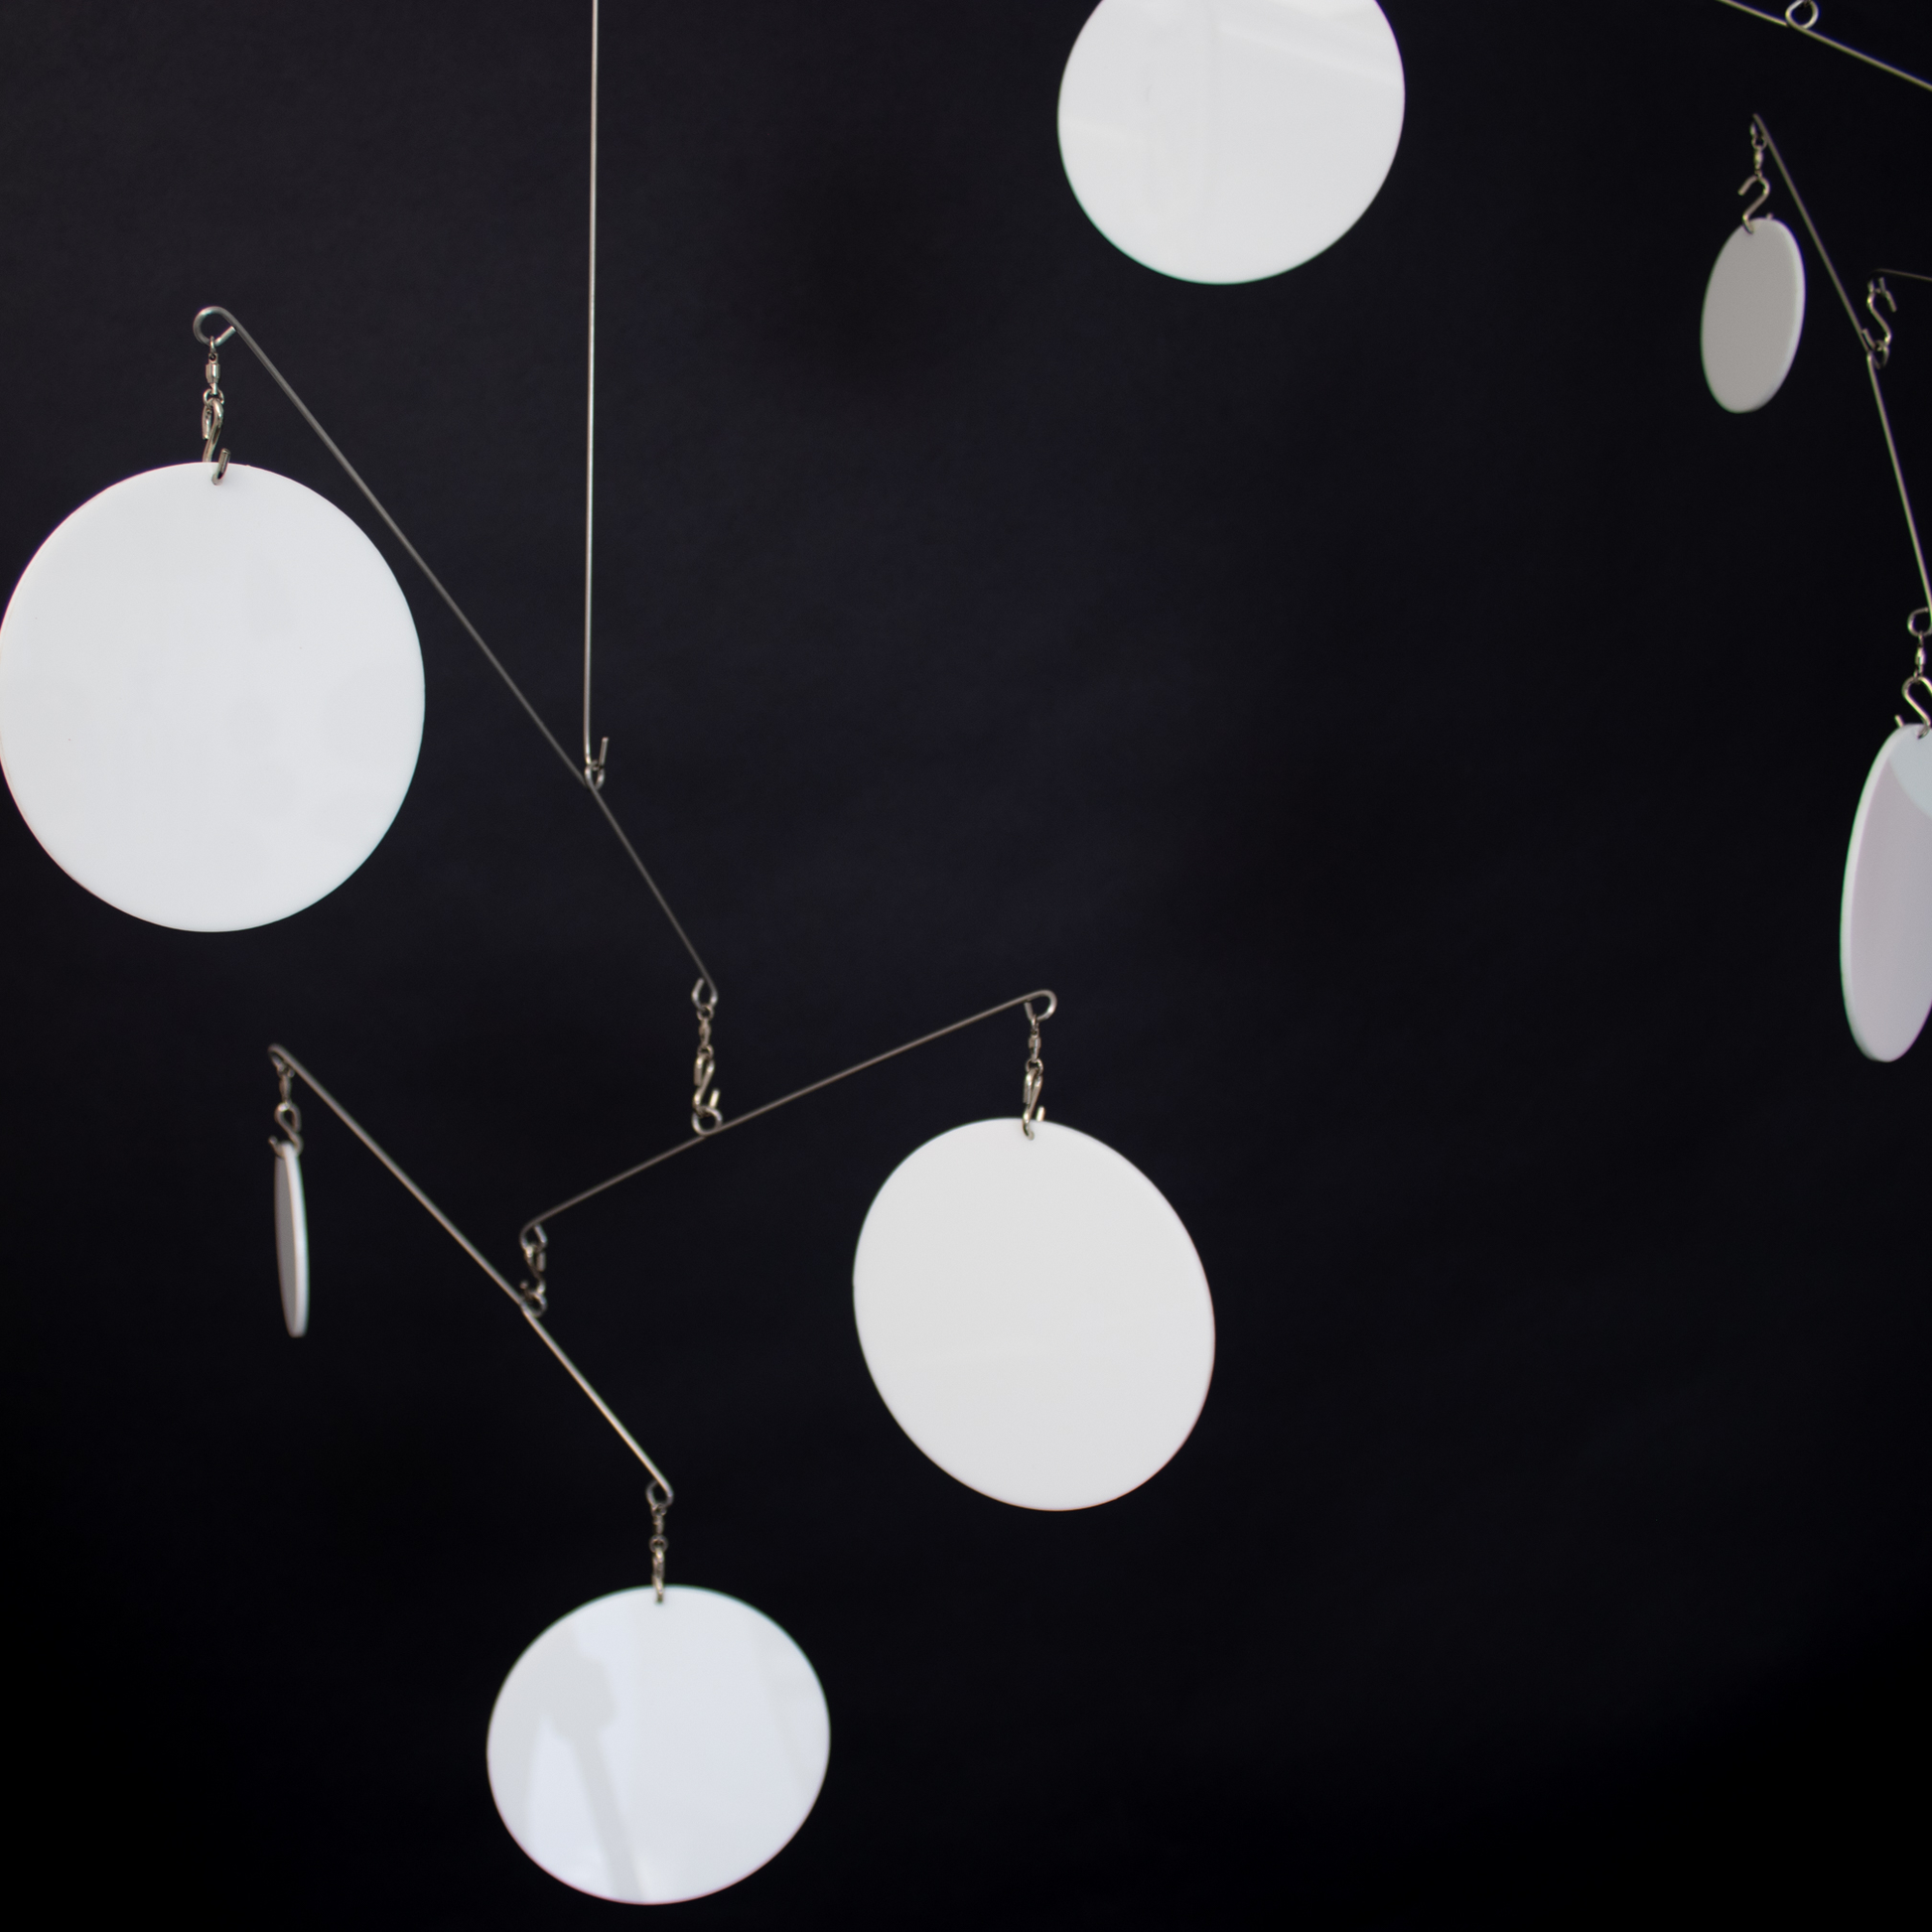 White Atomic Mobiles on black background - DIY Kits for hanging art mobiles in Mid Century Modern Style by AtomicMobiles.com